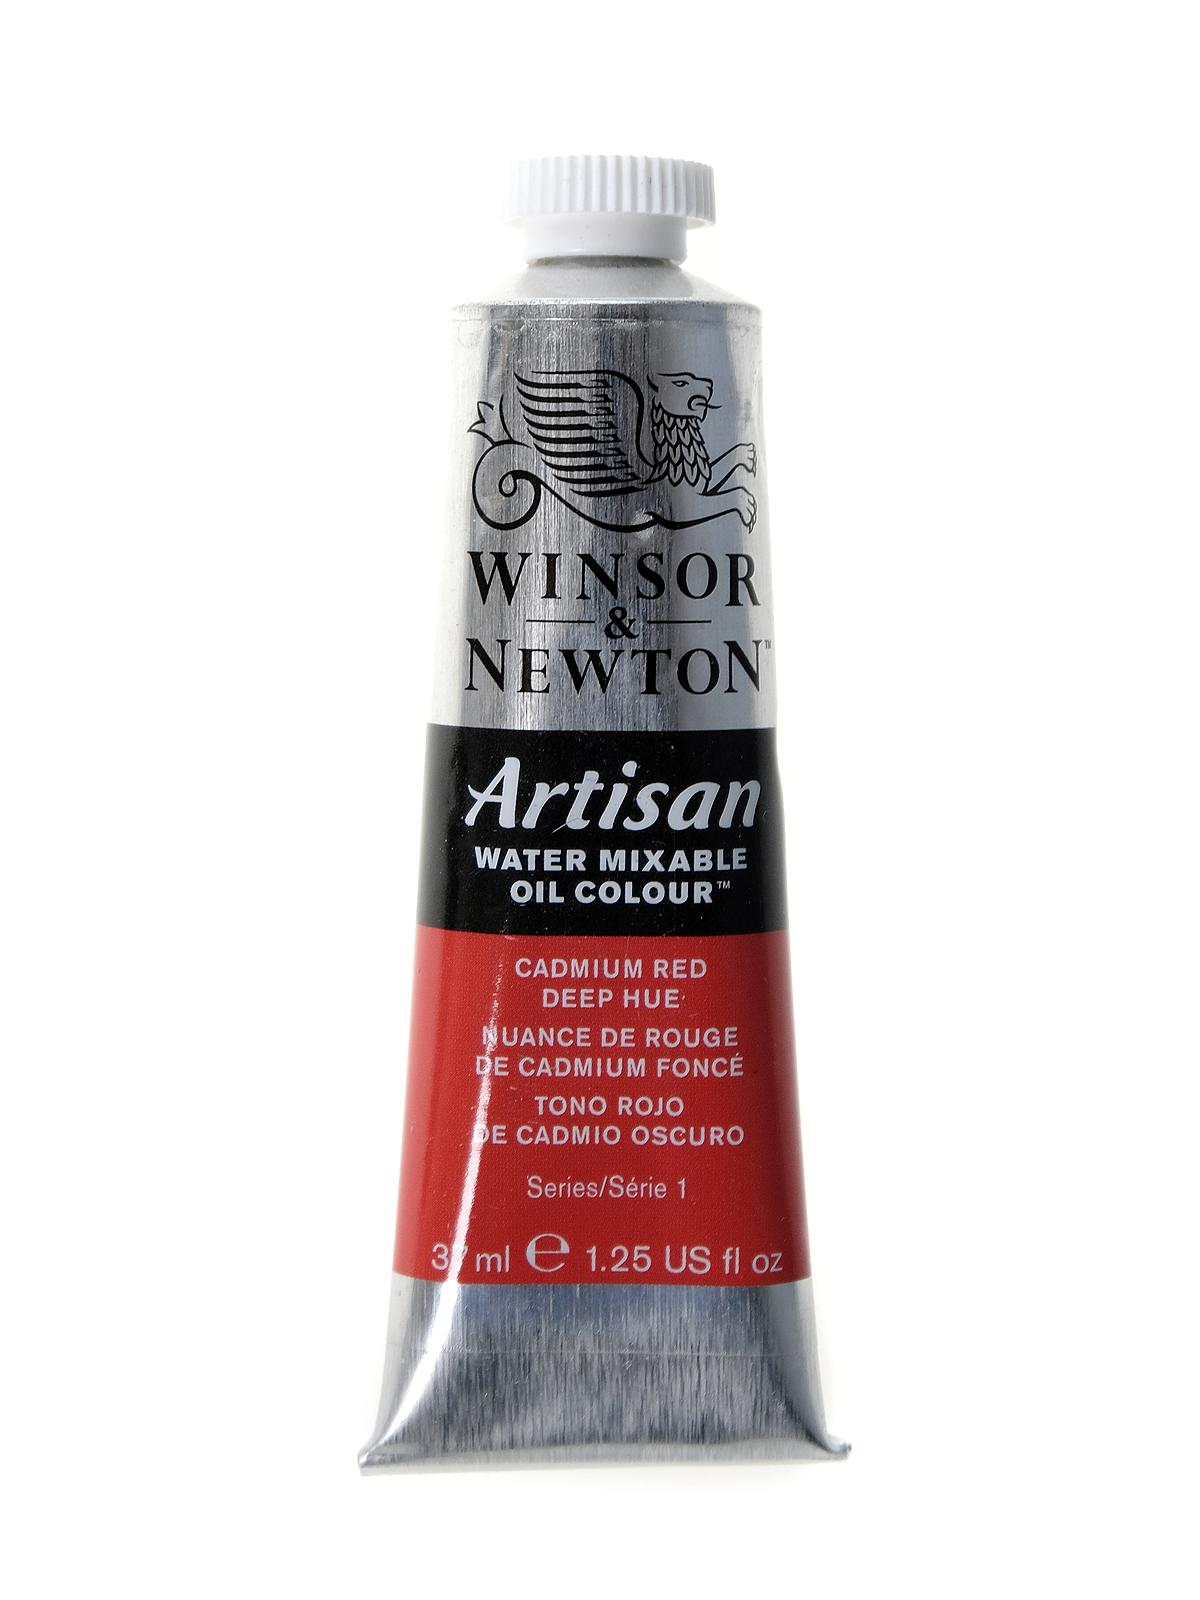 Artisan Water Mixable Oil Colours Cadmium Red Deep Hue 37 Ml 98